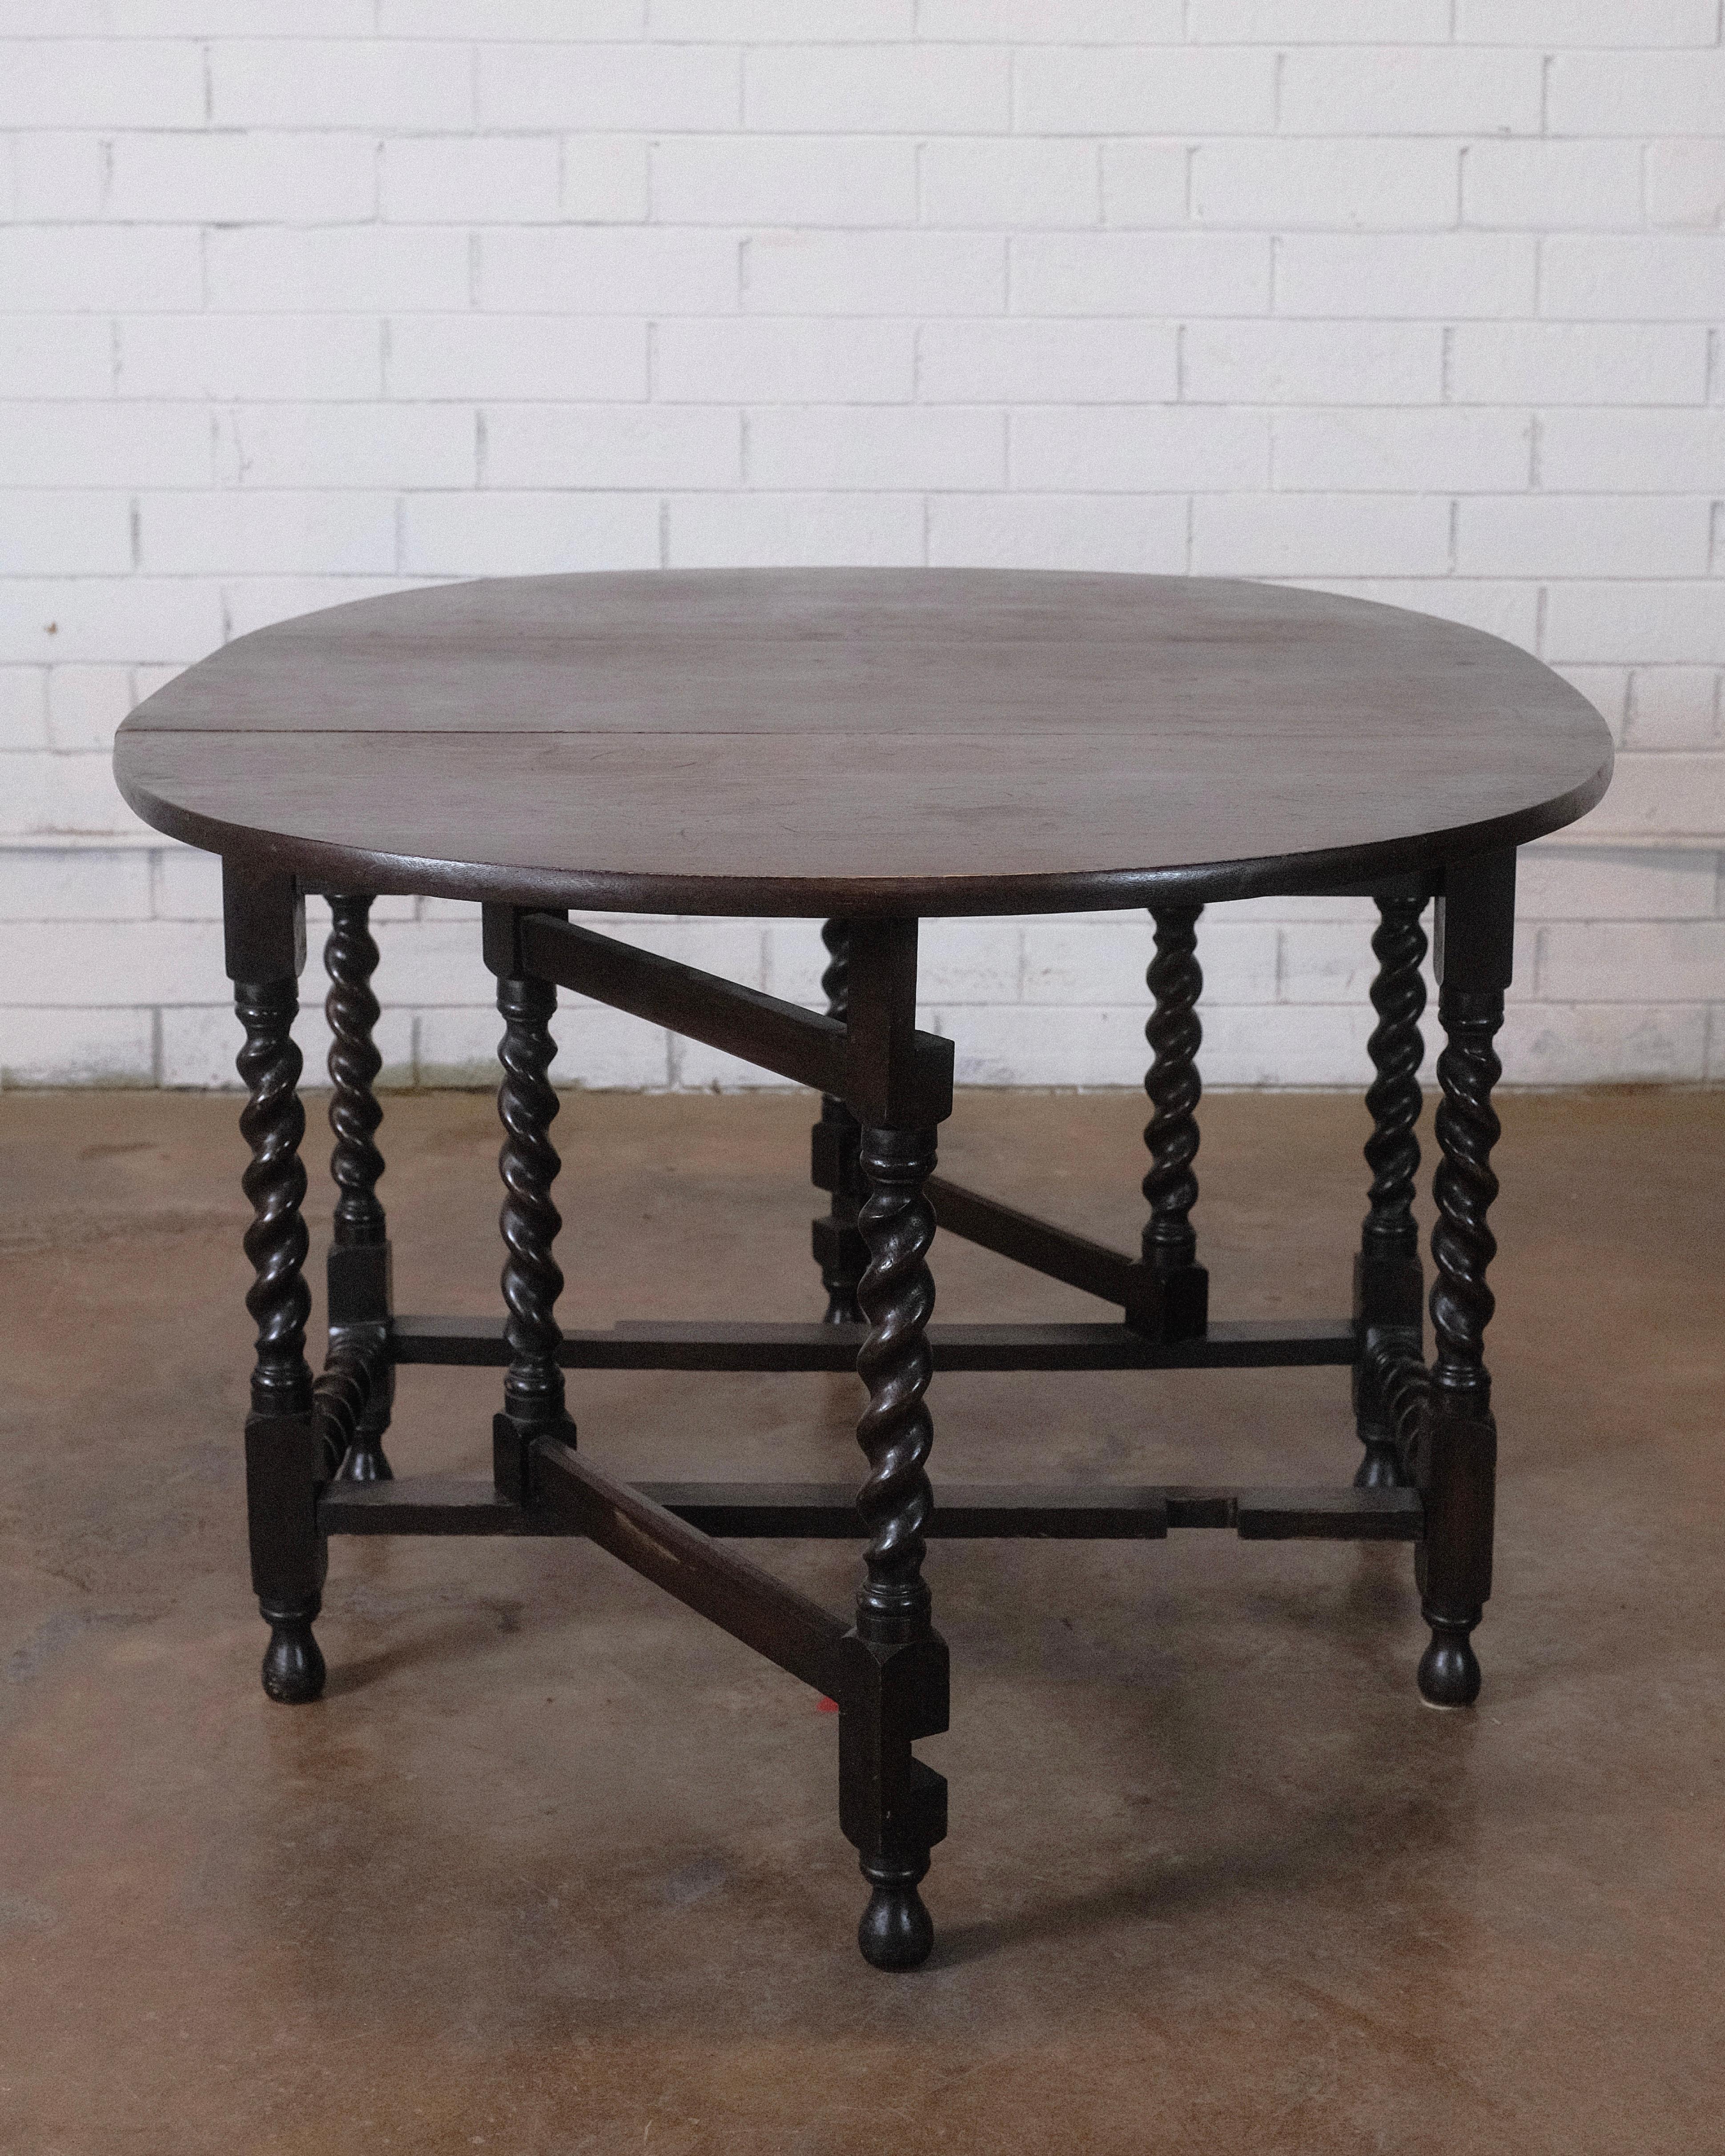 Late 18th Century Antique English Oak Barley Twist Gate Leg Table In Good Condition For Sale In High Point, NC